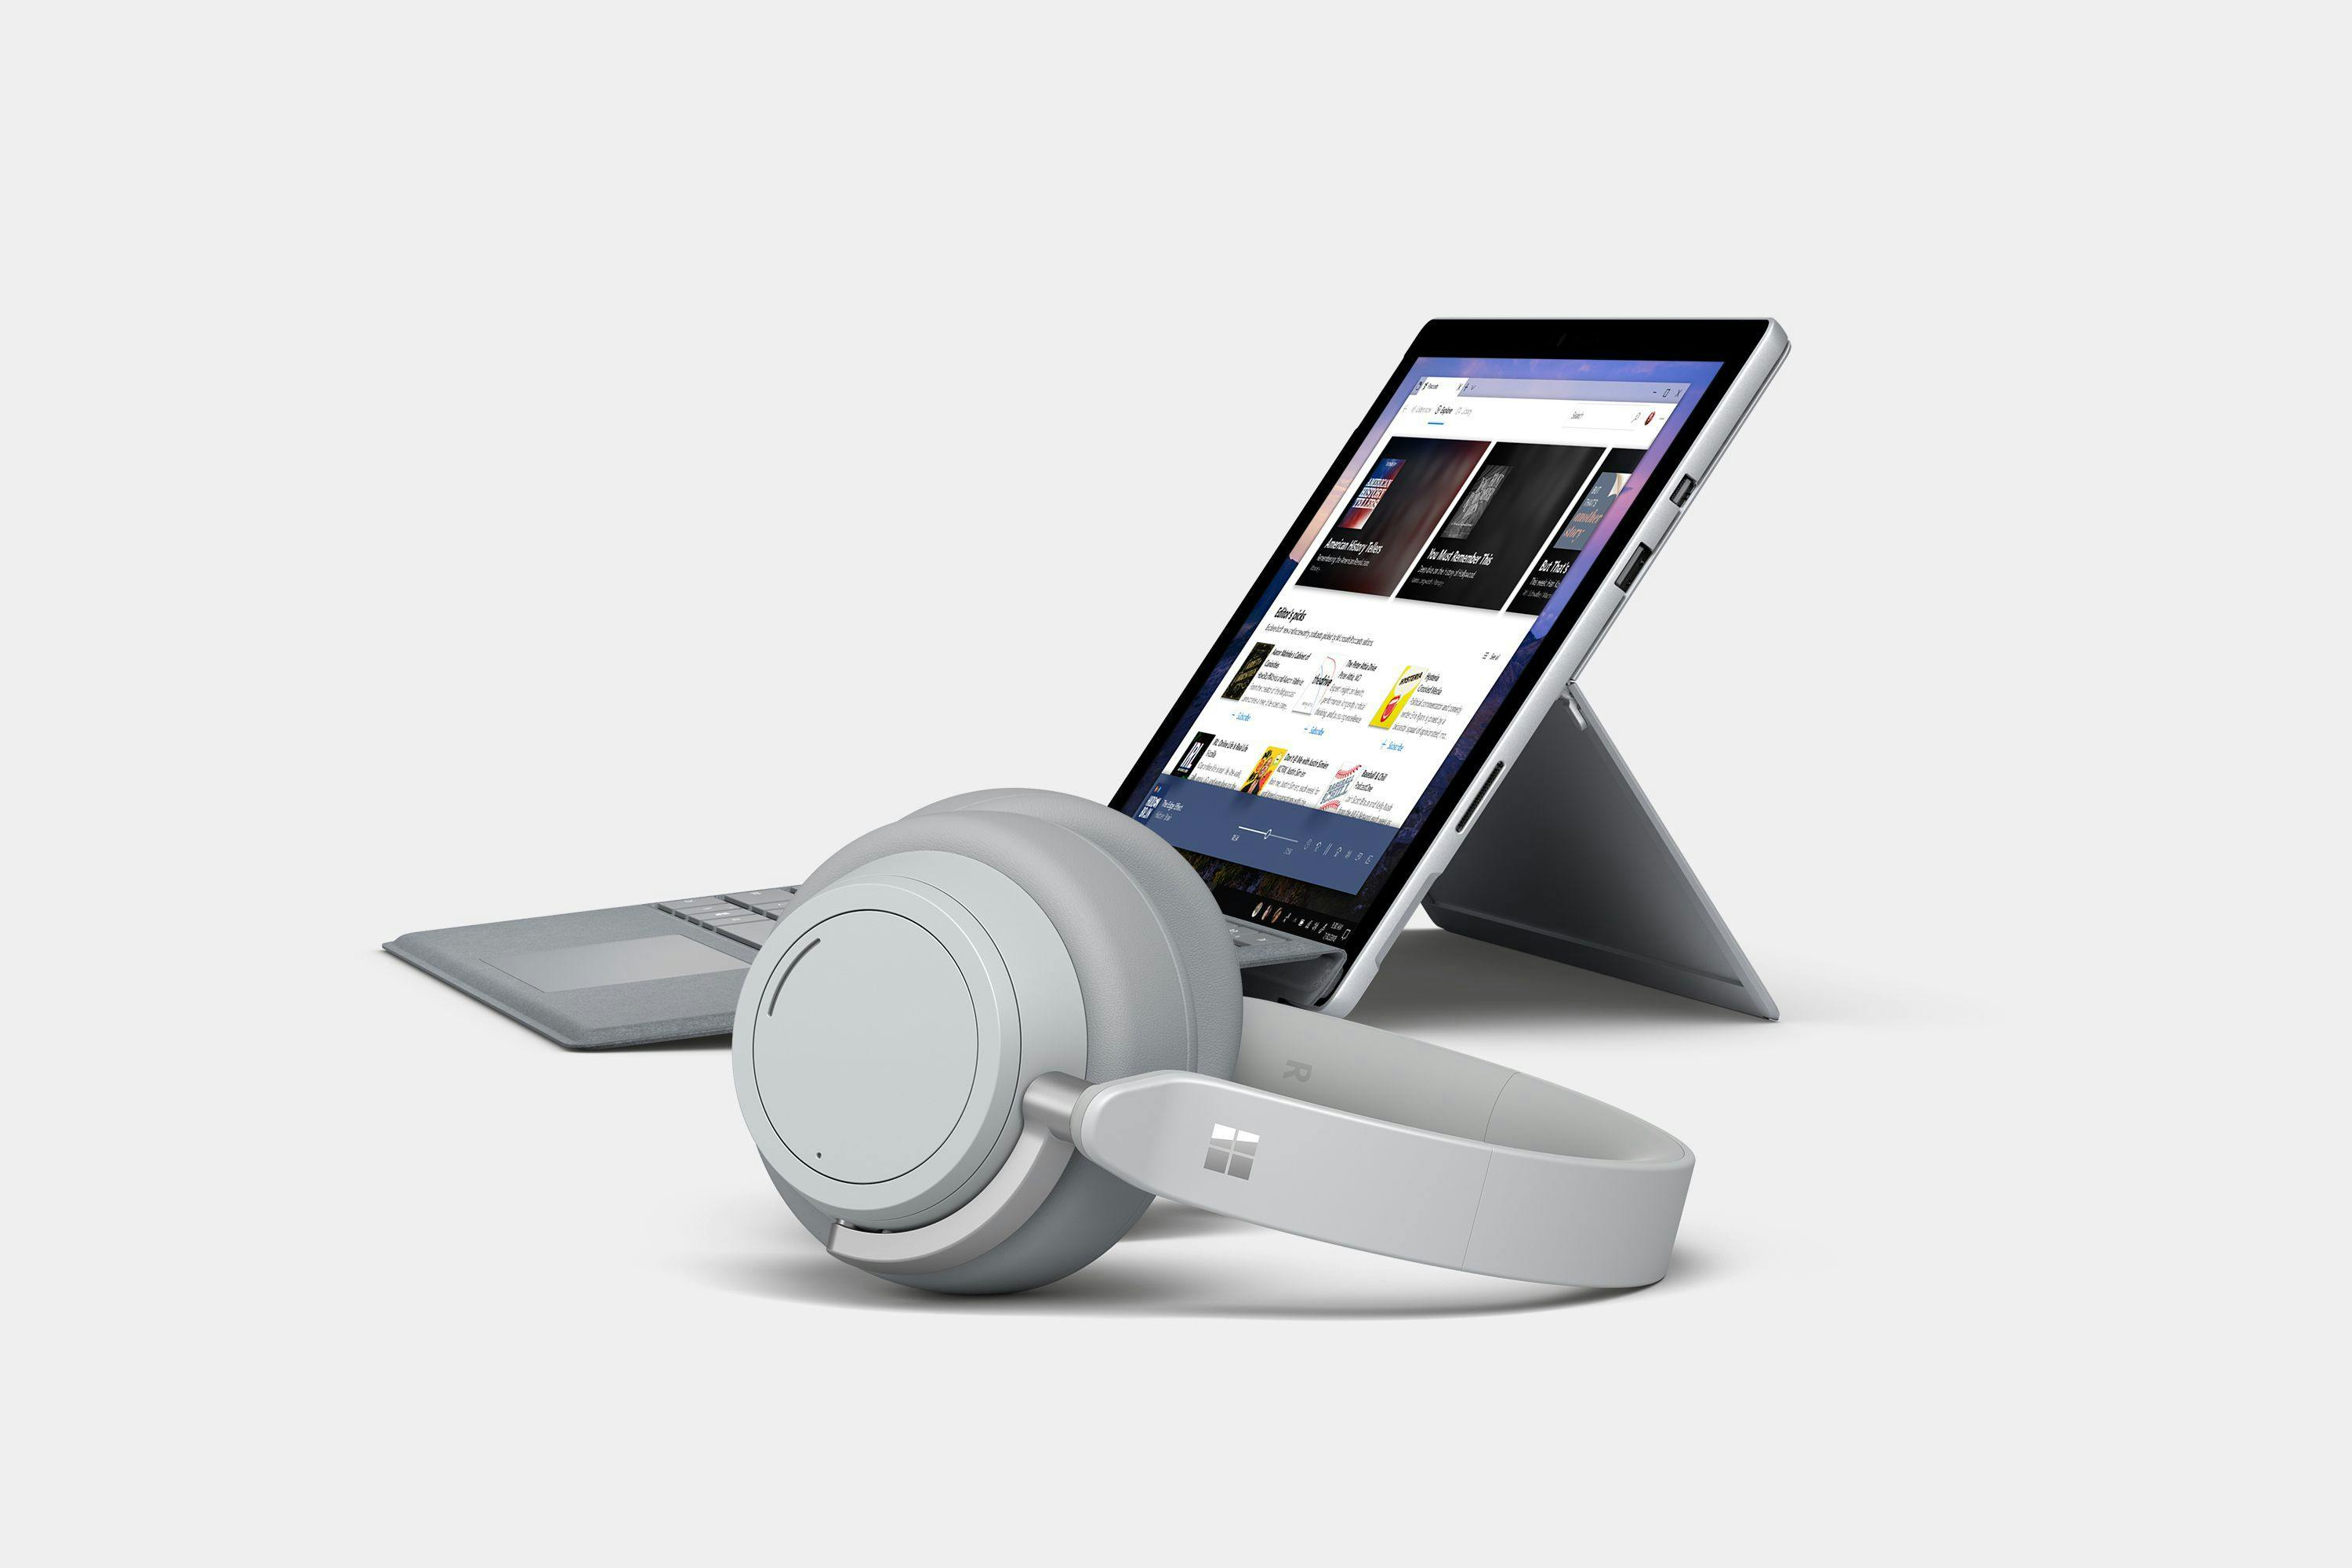 A Surface Pro shows a podcast app concept, with a pair of Surface Headphones in front of it.